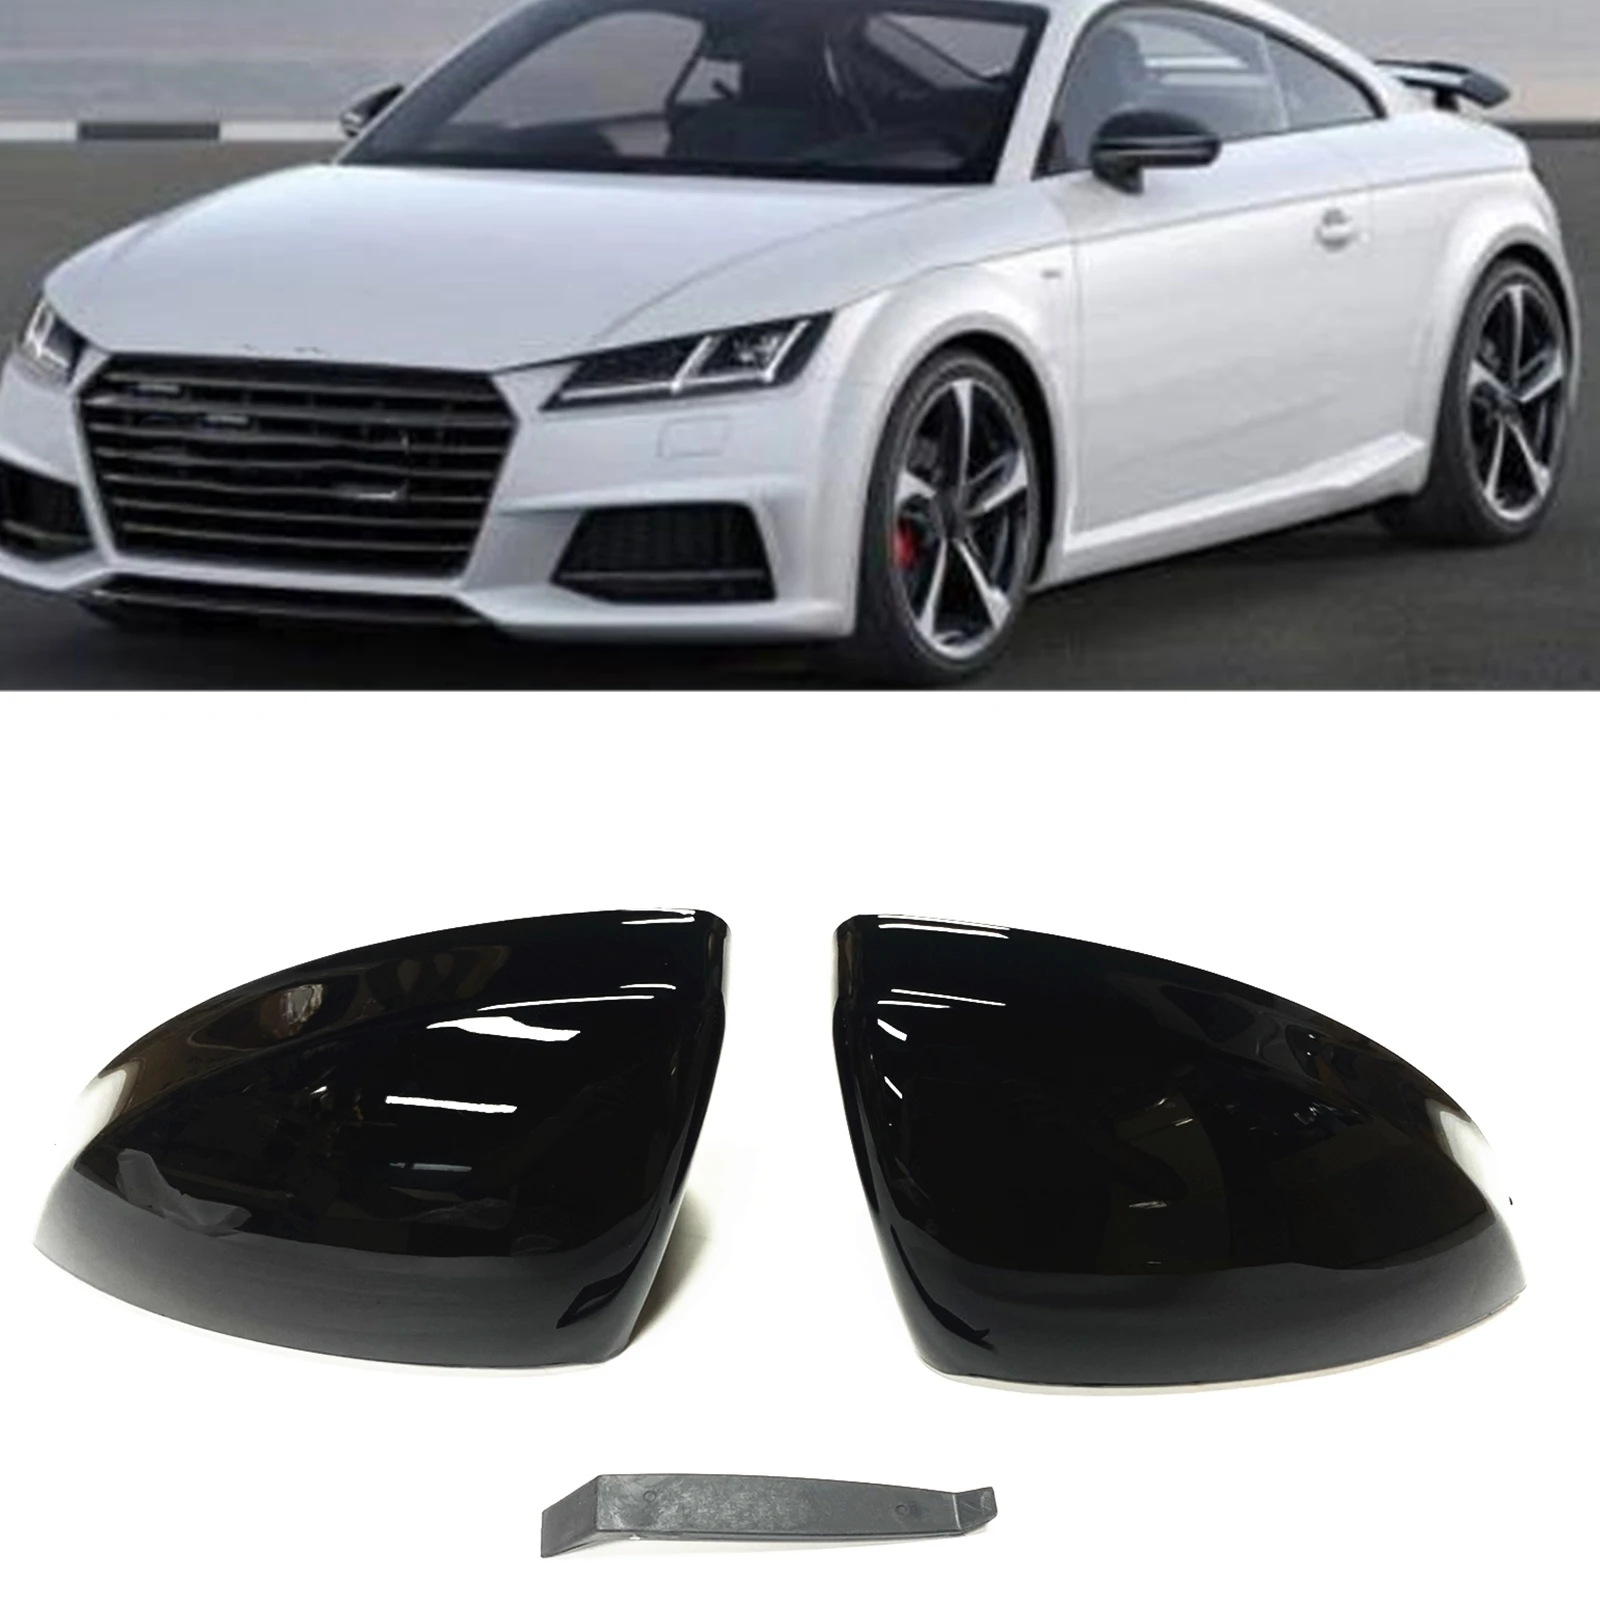 For Audi R8 (4S) 2016-2021 TT TTS TTRS MK3 (8S) 2015-2021 Without Lane Assist Rear View Mirror Cover Gloss Black Cap Replacement 1